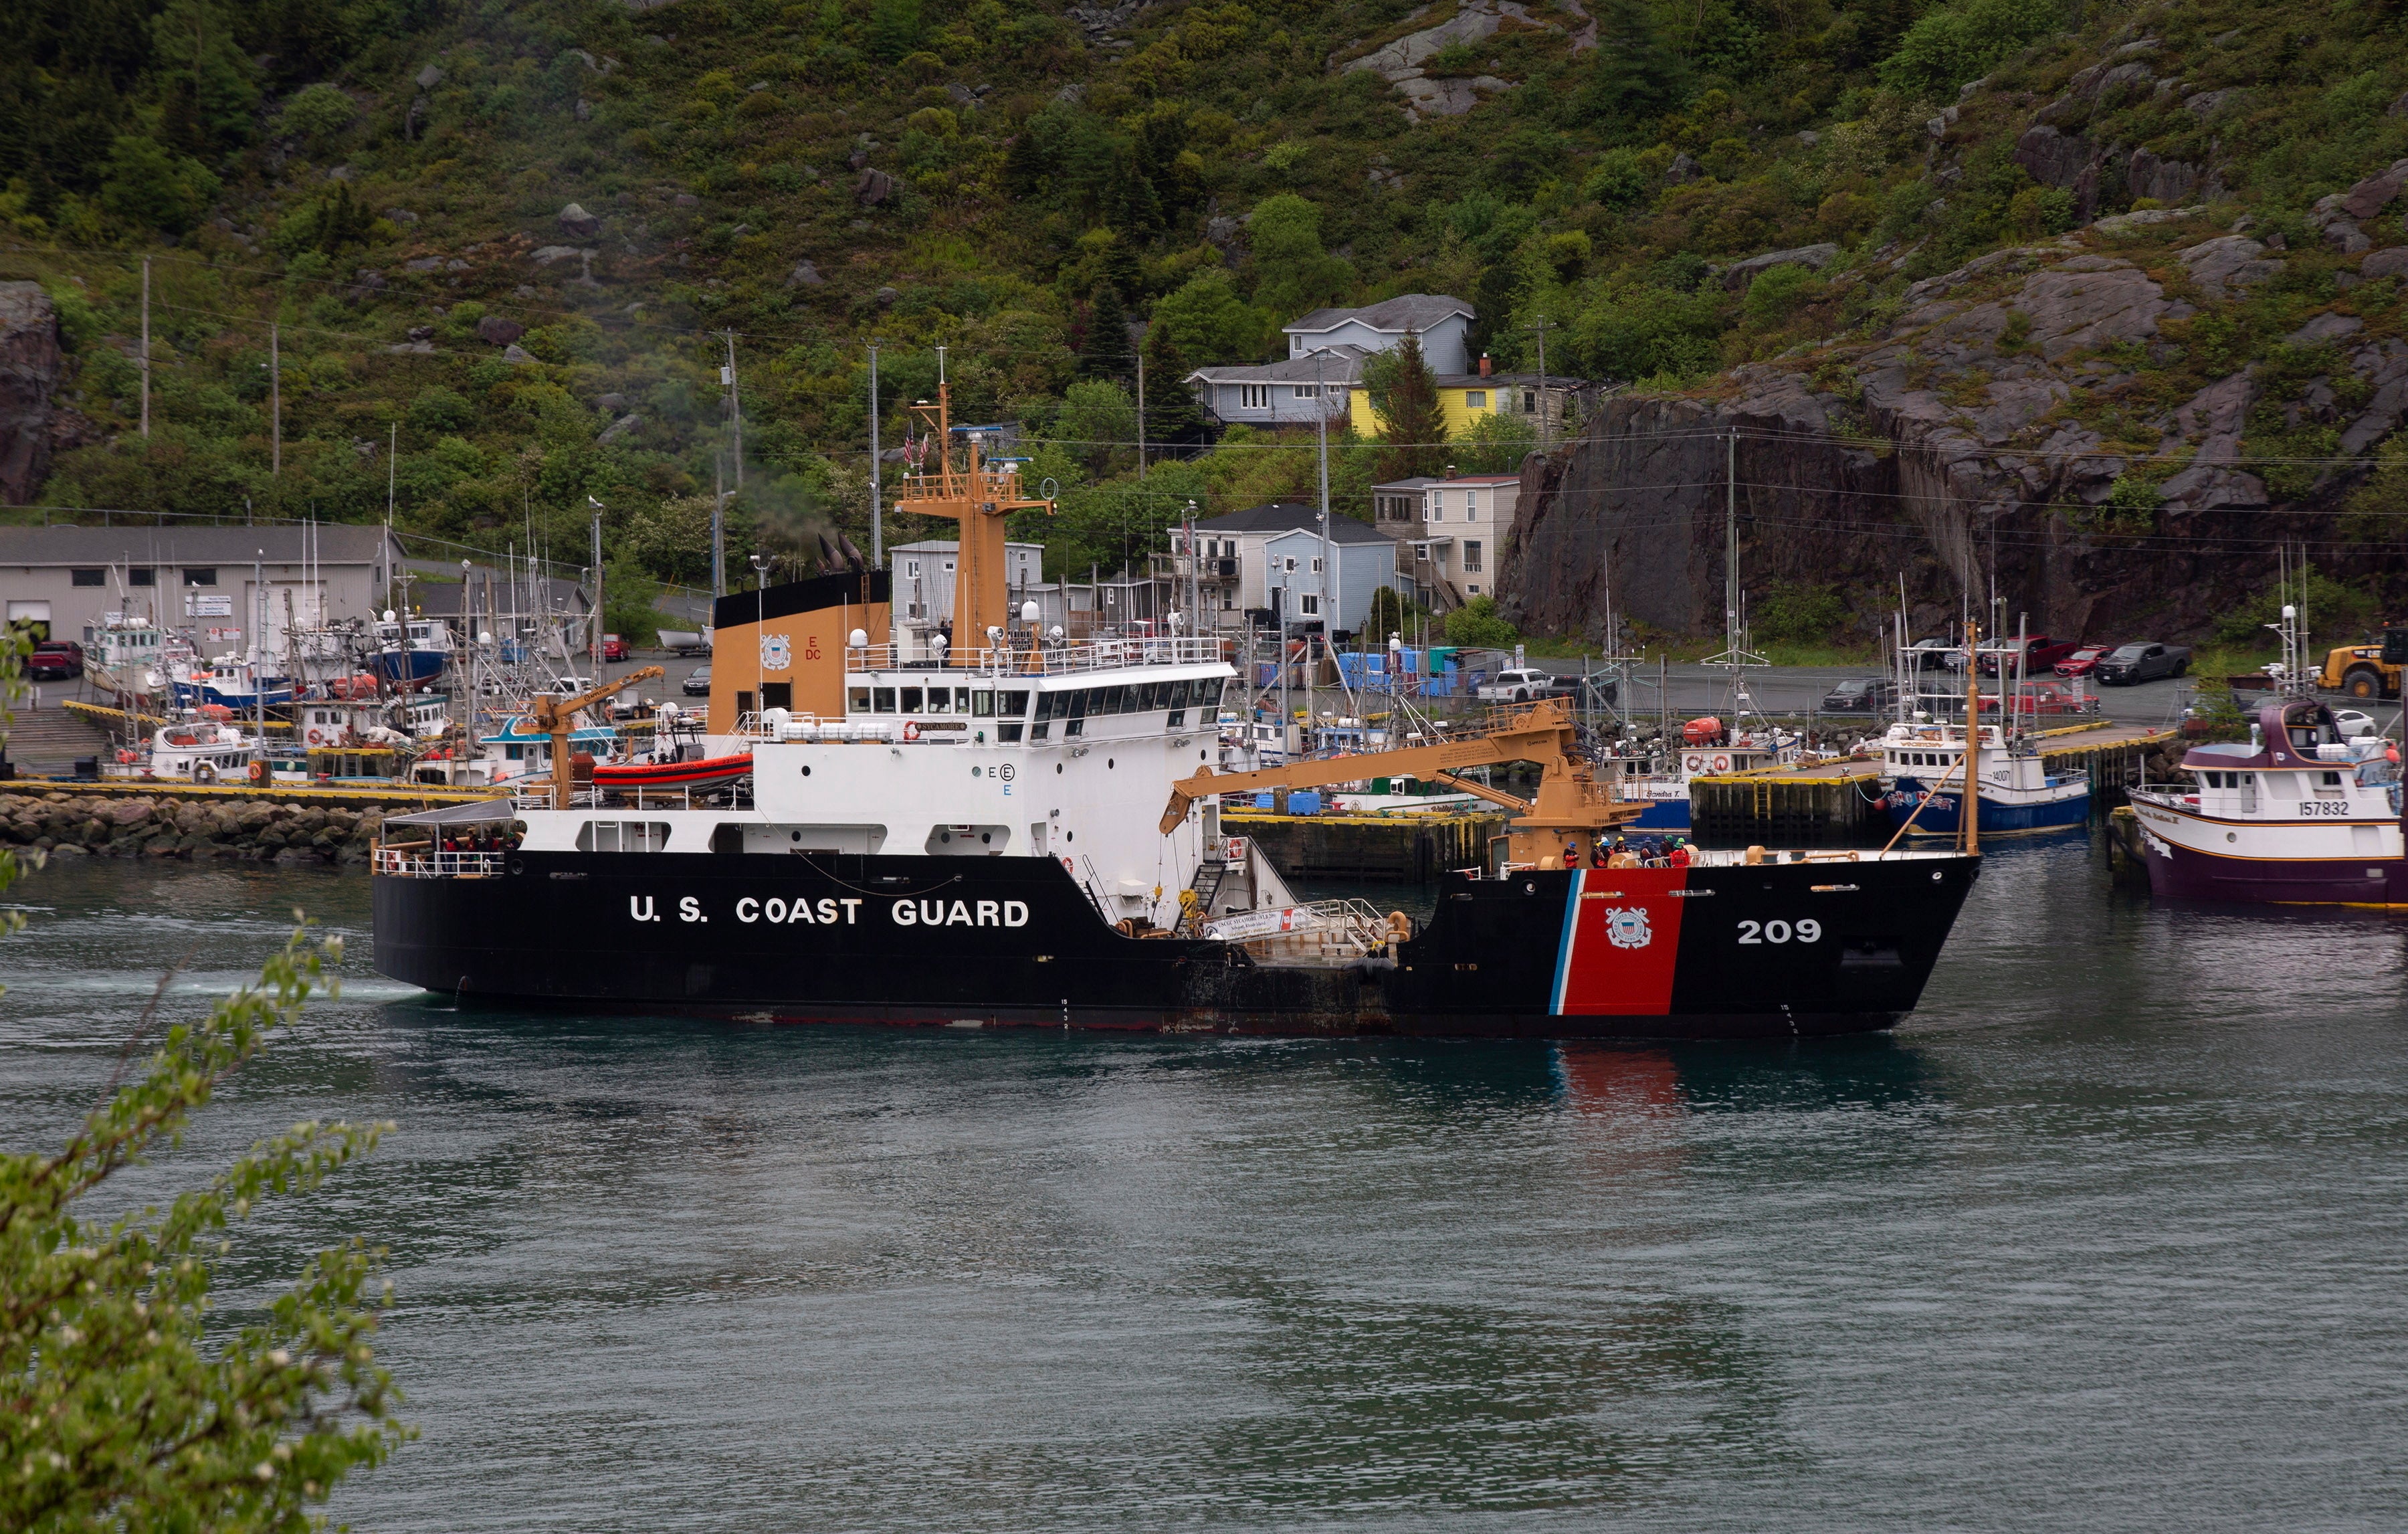 A U.S. Coast Guard ship arrives in the harbor of St. John's, Newfoundland, on Wednesday, June 28, 2023